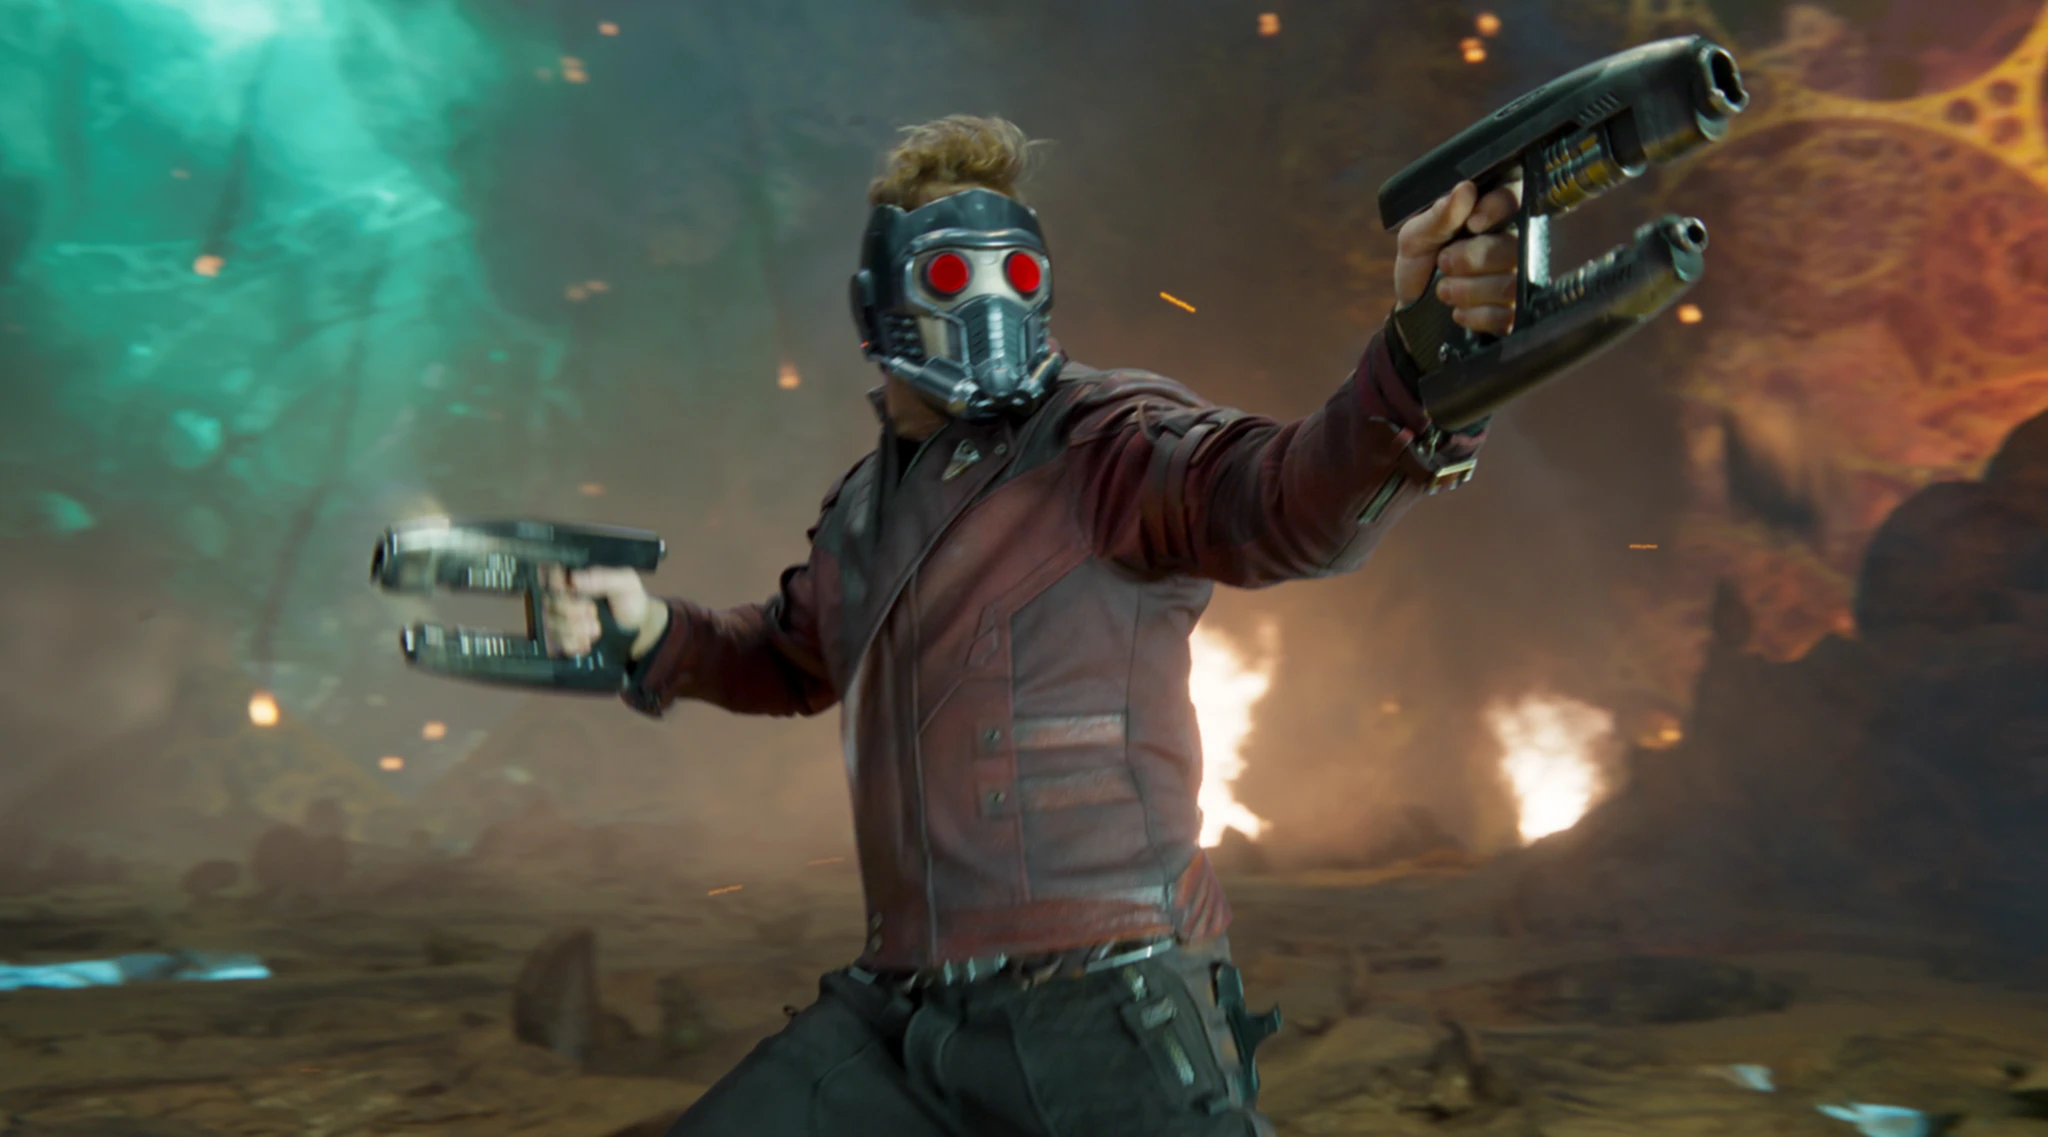 James Gunn Promises 'Vol. 3' Is 'The End' of the Guardians of the Galaxy 